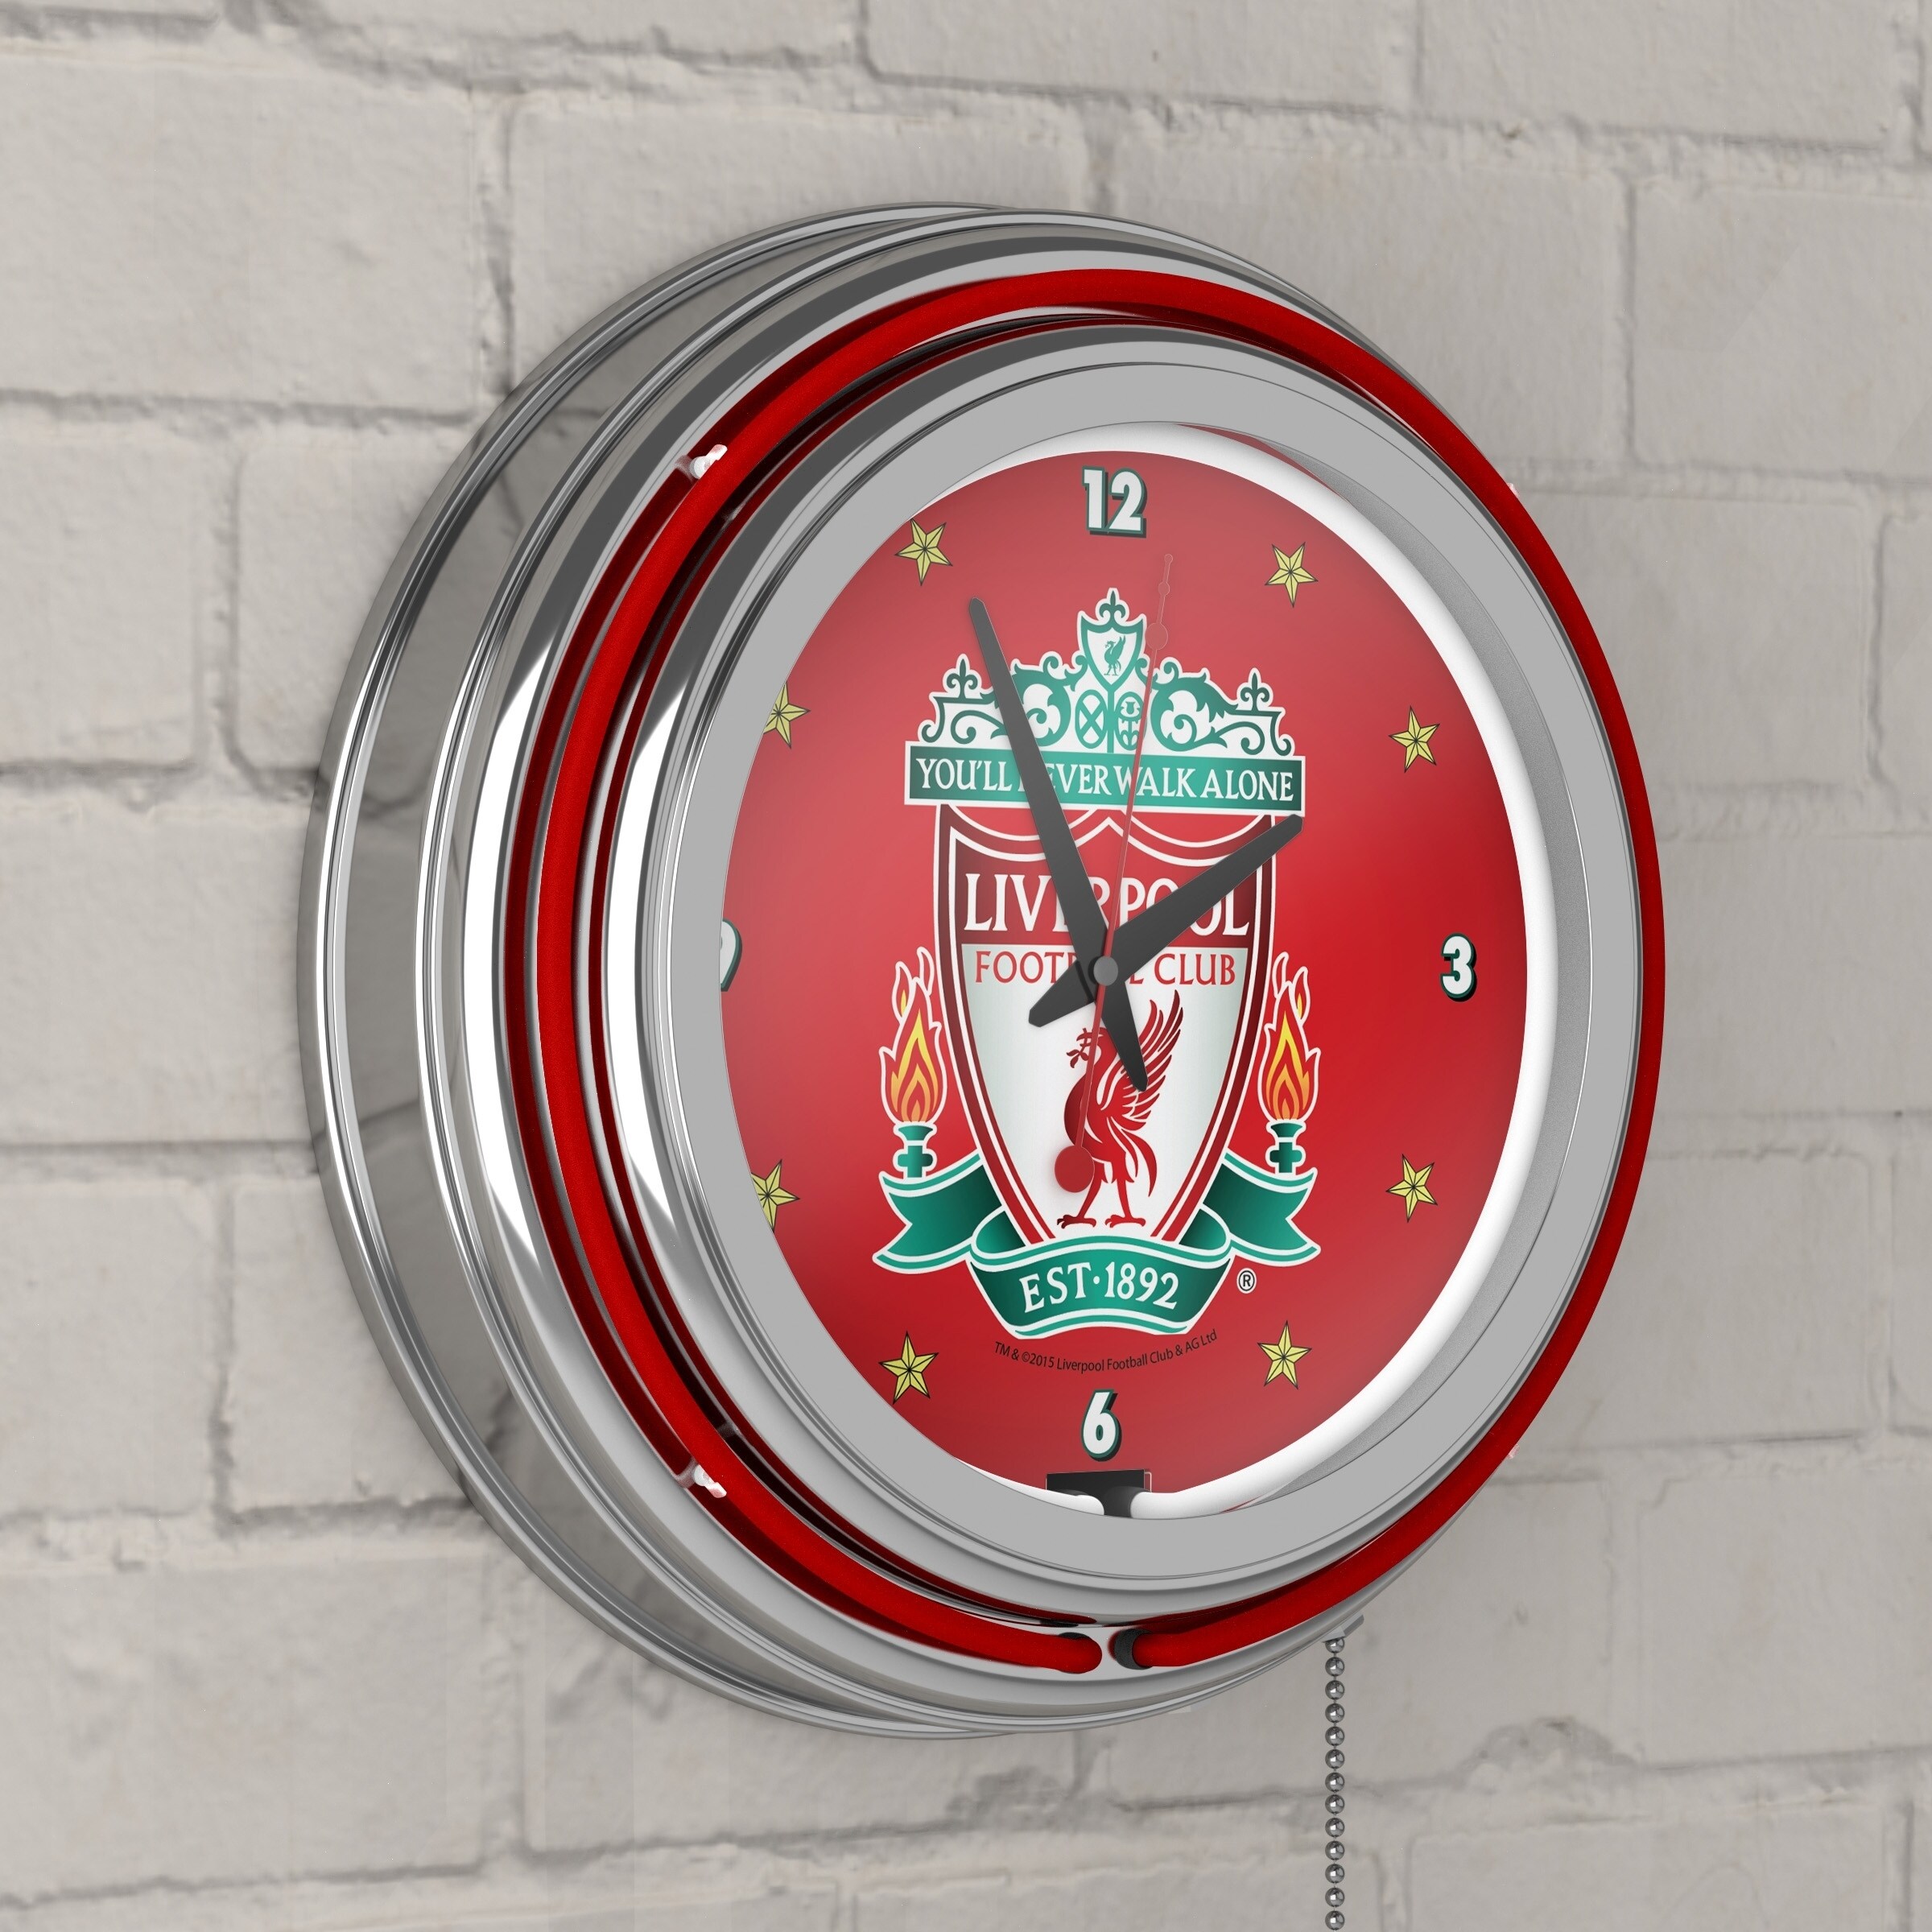 Premier League Liverpool Football Club Chrome Double Rung Neon Clock Red Overstock